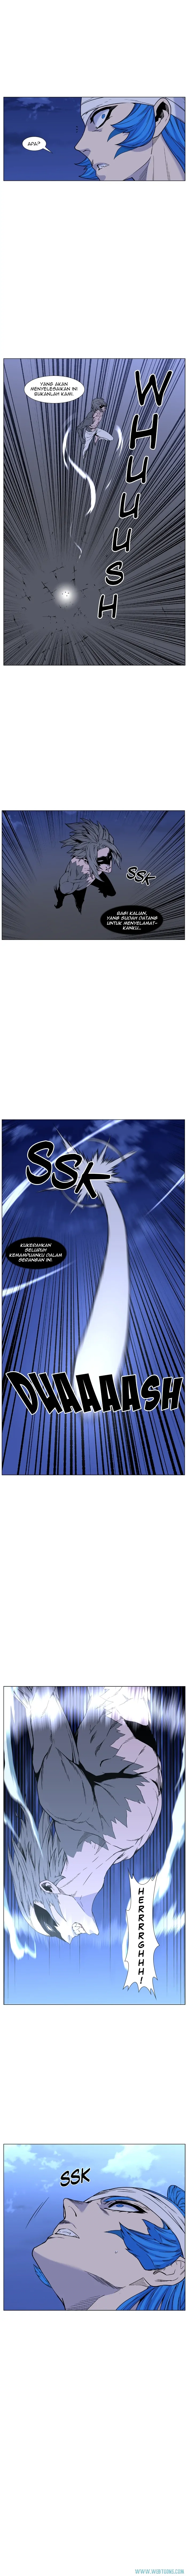 Noblesse Chapter 454 - 95